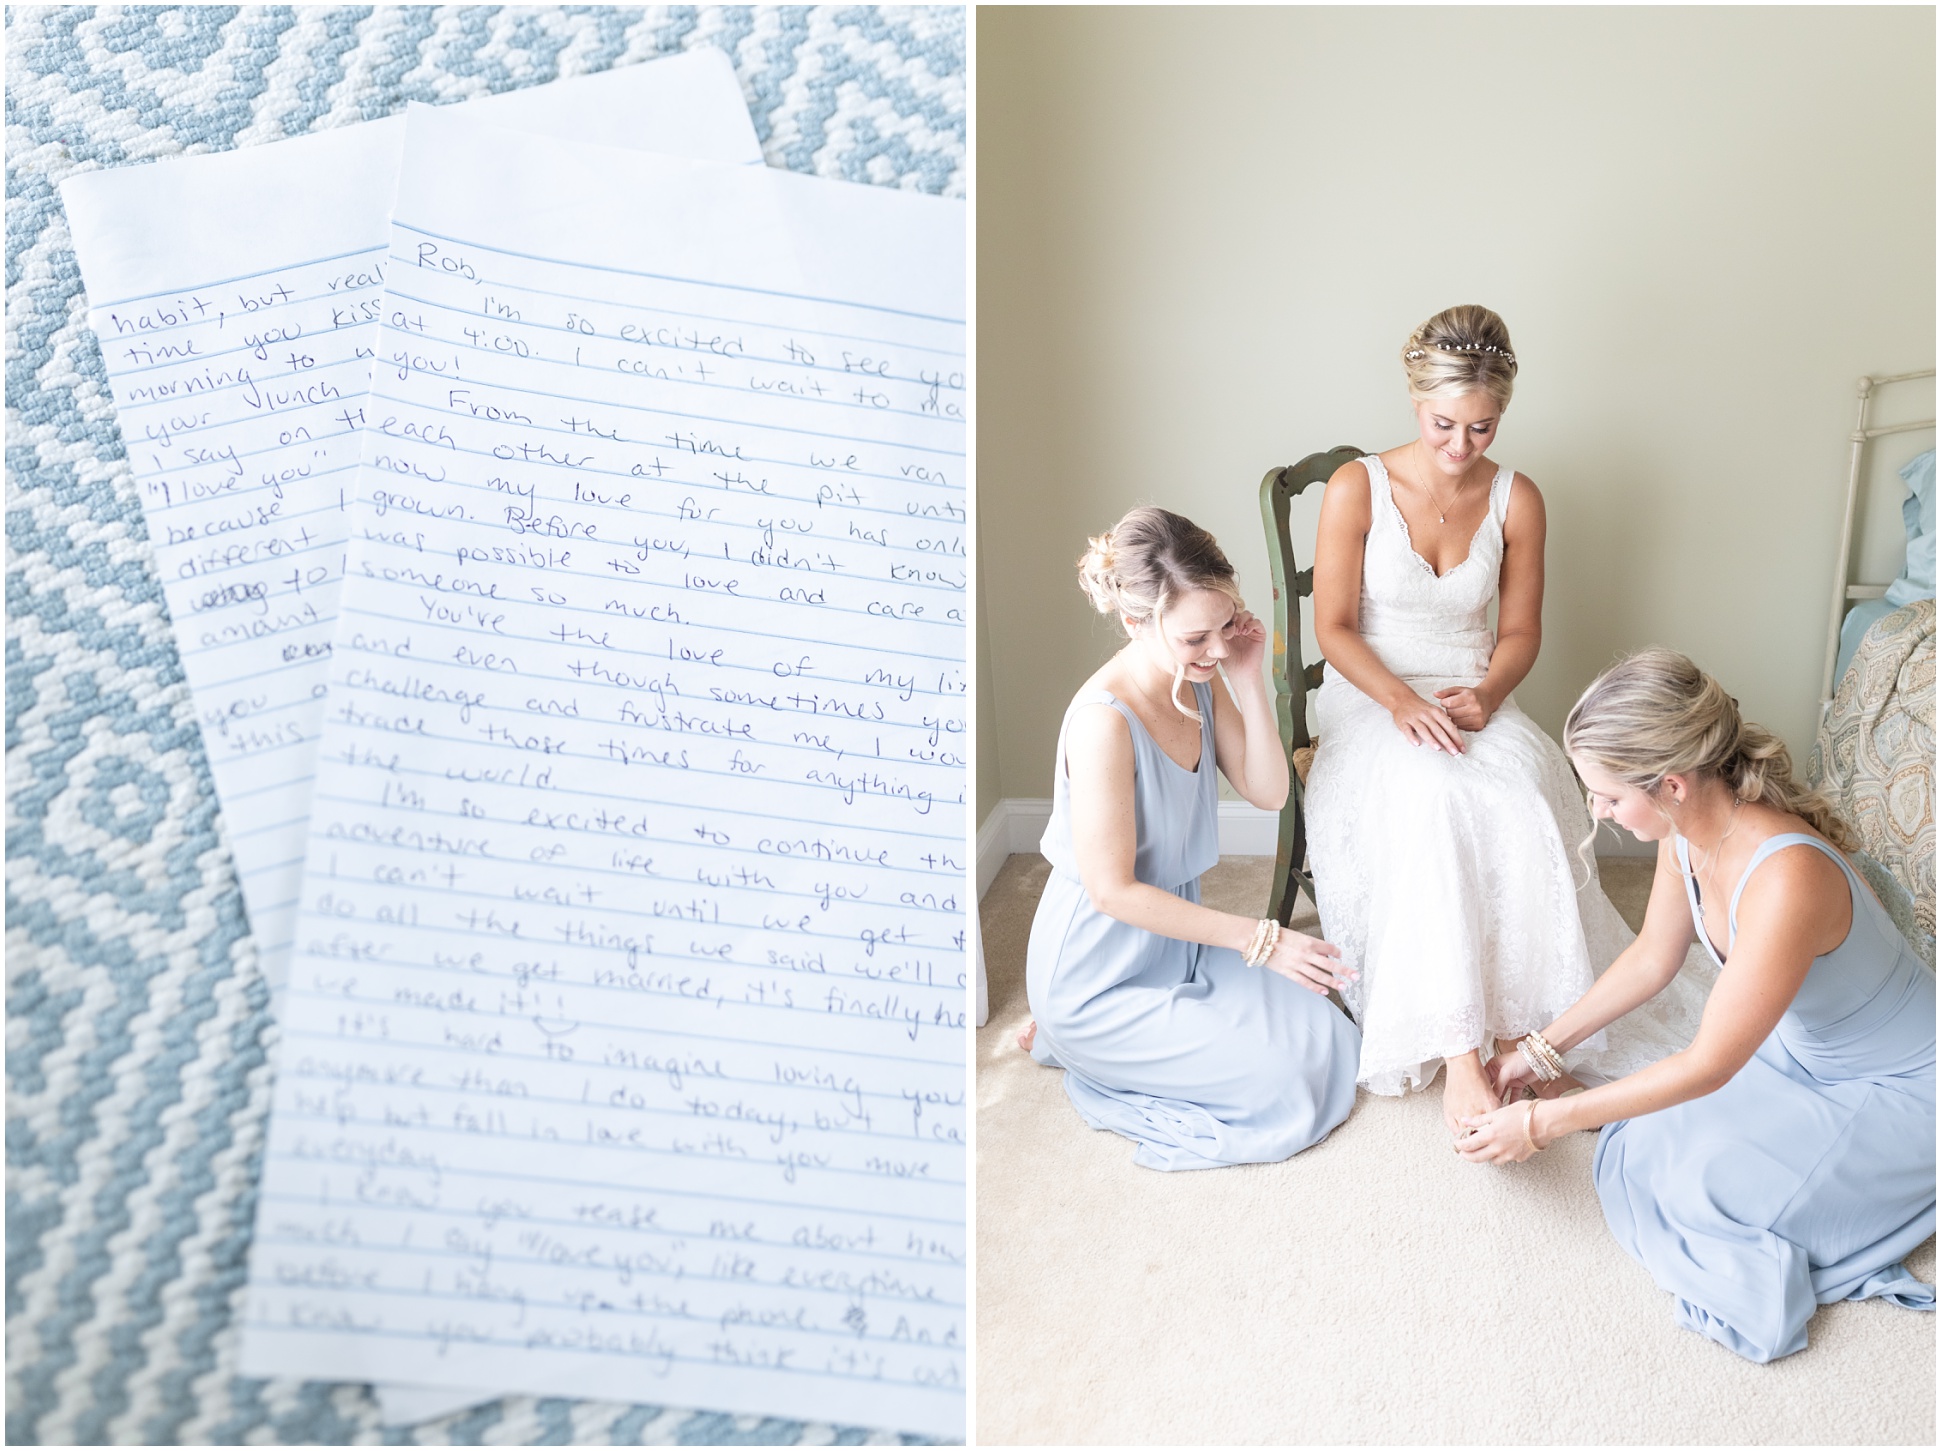 Left Image: Groom's letter to bride; Right Image: MOH helping bride put on her shoes